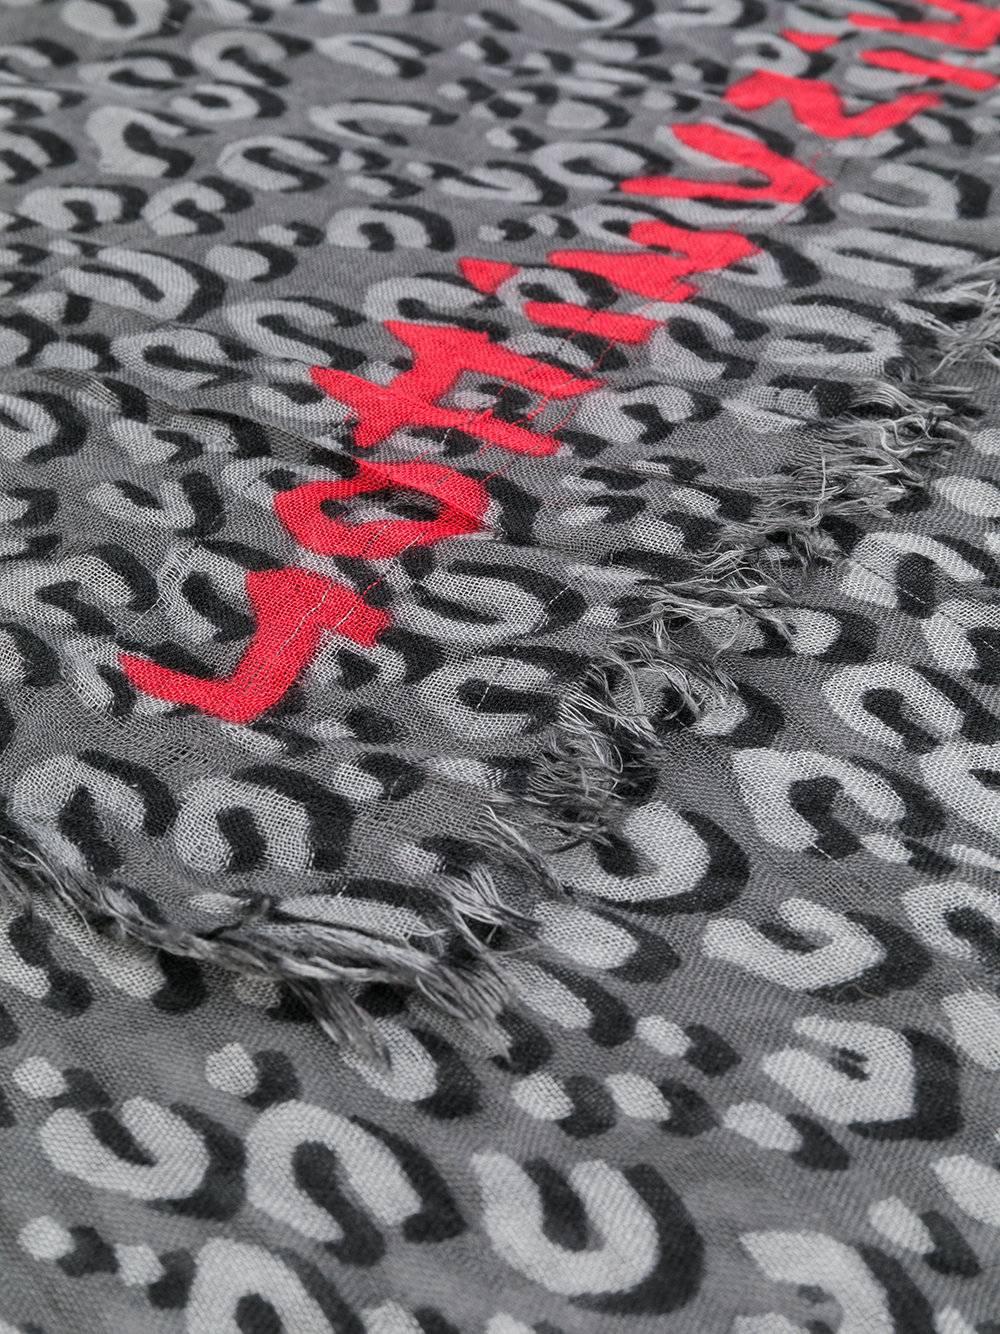 Effortlessly elegant and stylish, this Louis Vuitton cotton scarf will envelop you in a blanket of delicate softness. Featuring the iconic Stephen Sprouse leopard print, this eye-catching scarf is ideal for all seasons. 

Colour: Grey

Composition: